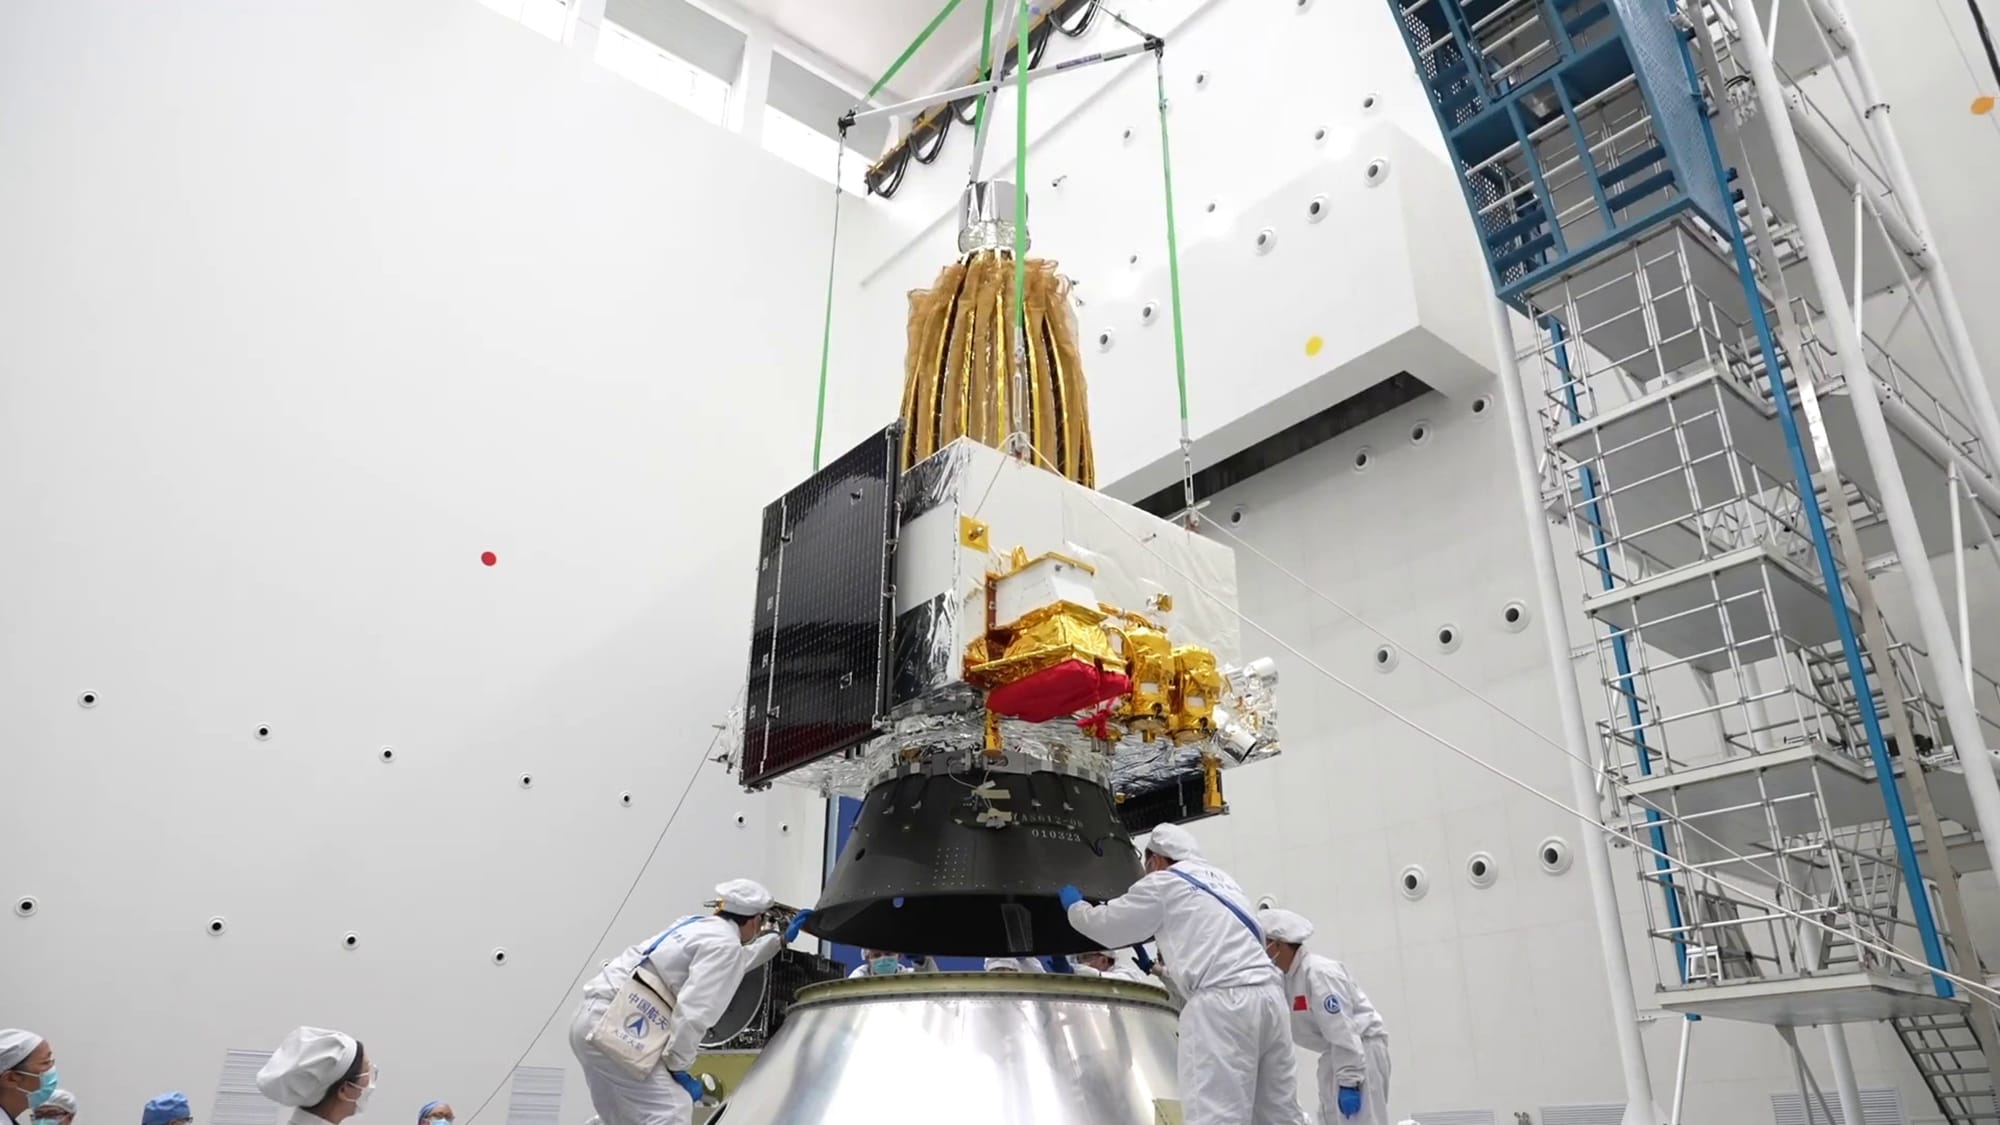 Queqiao-2 during integration to the payload adapter of the Long March 8 Y3 vehicle.